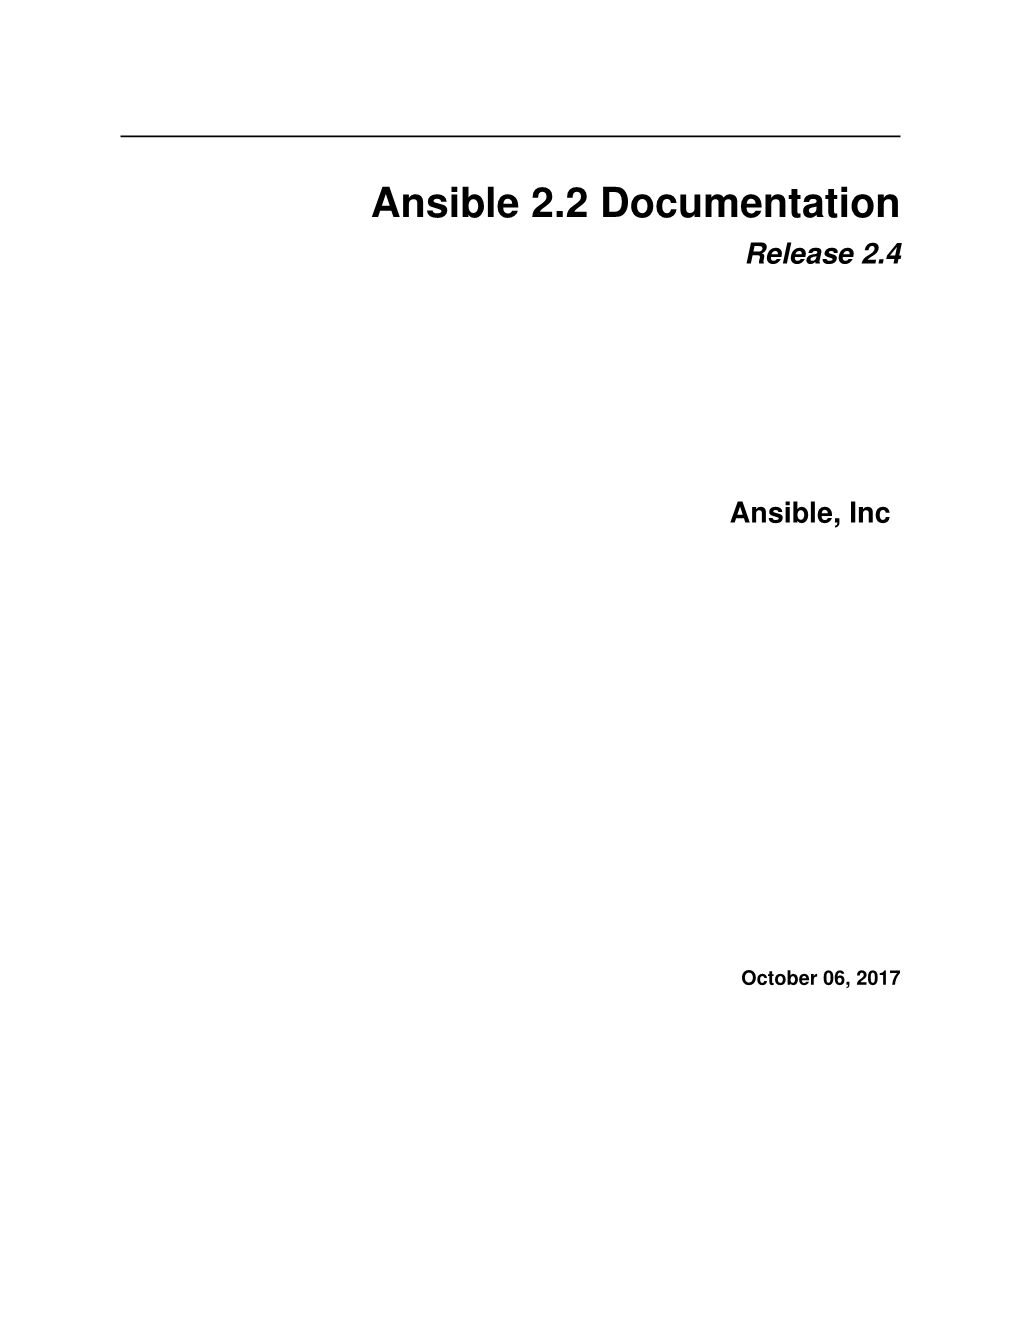 Ansible 2.2 Documentation Release 2.4